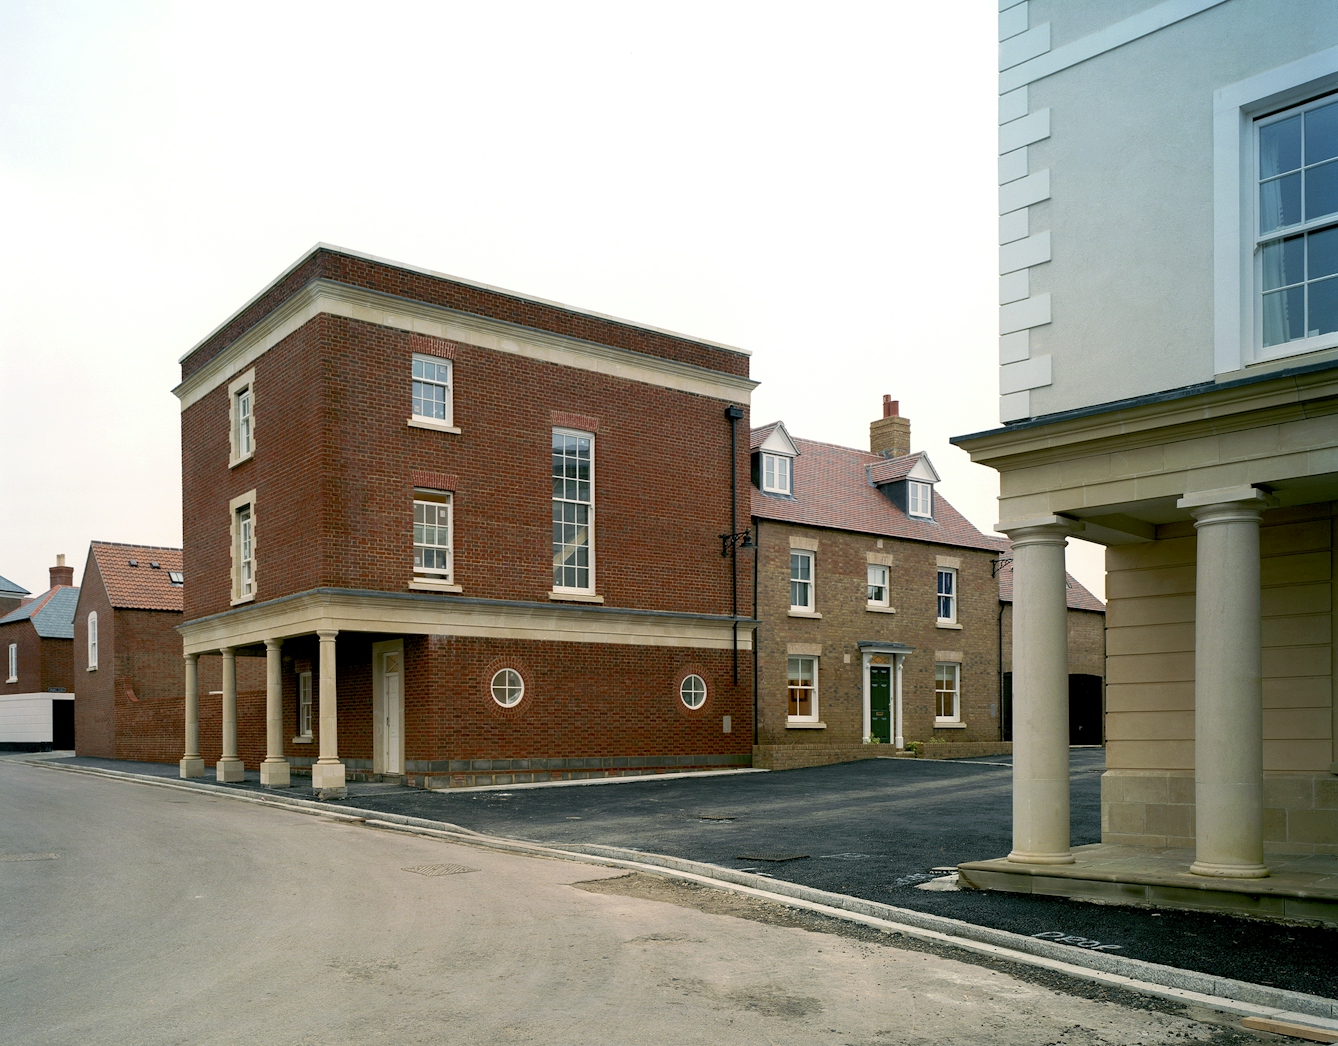 A contemporary photograph taken in Poundbury. Shows streets empty of people and cars, and a purpose-built new boxy houses with old-style columns.